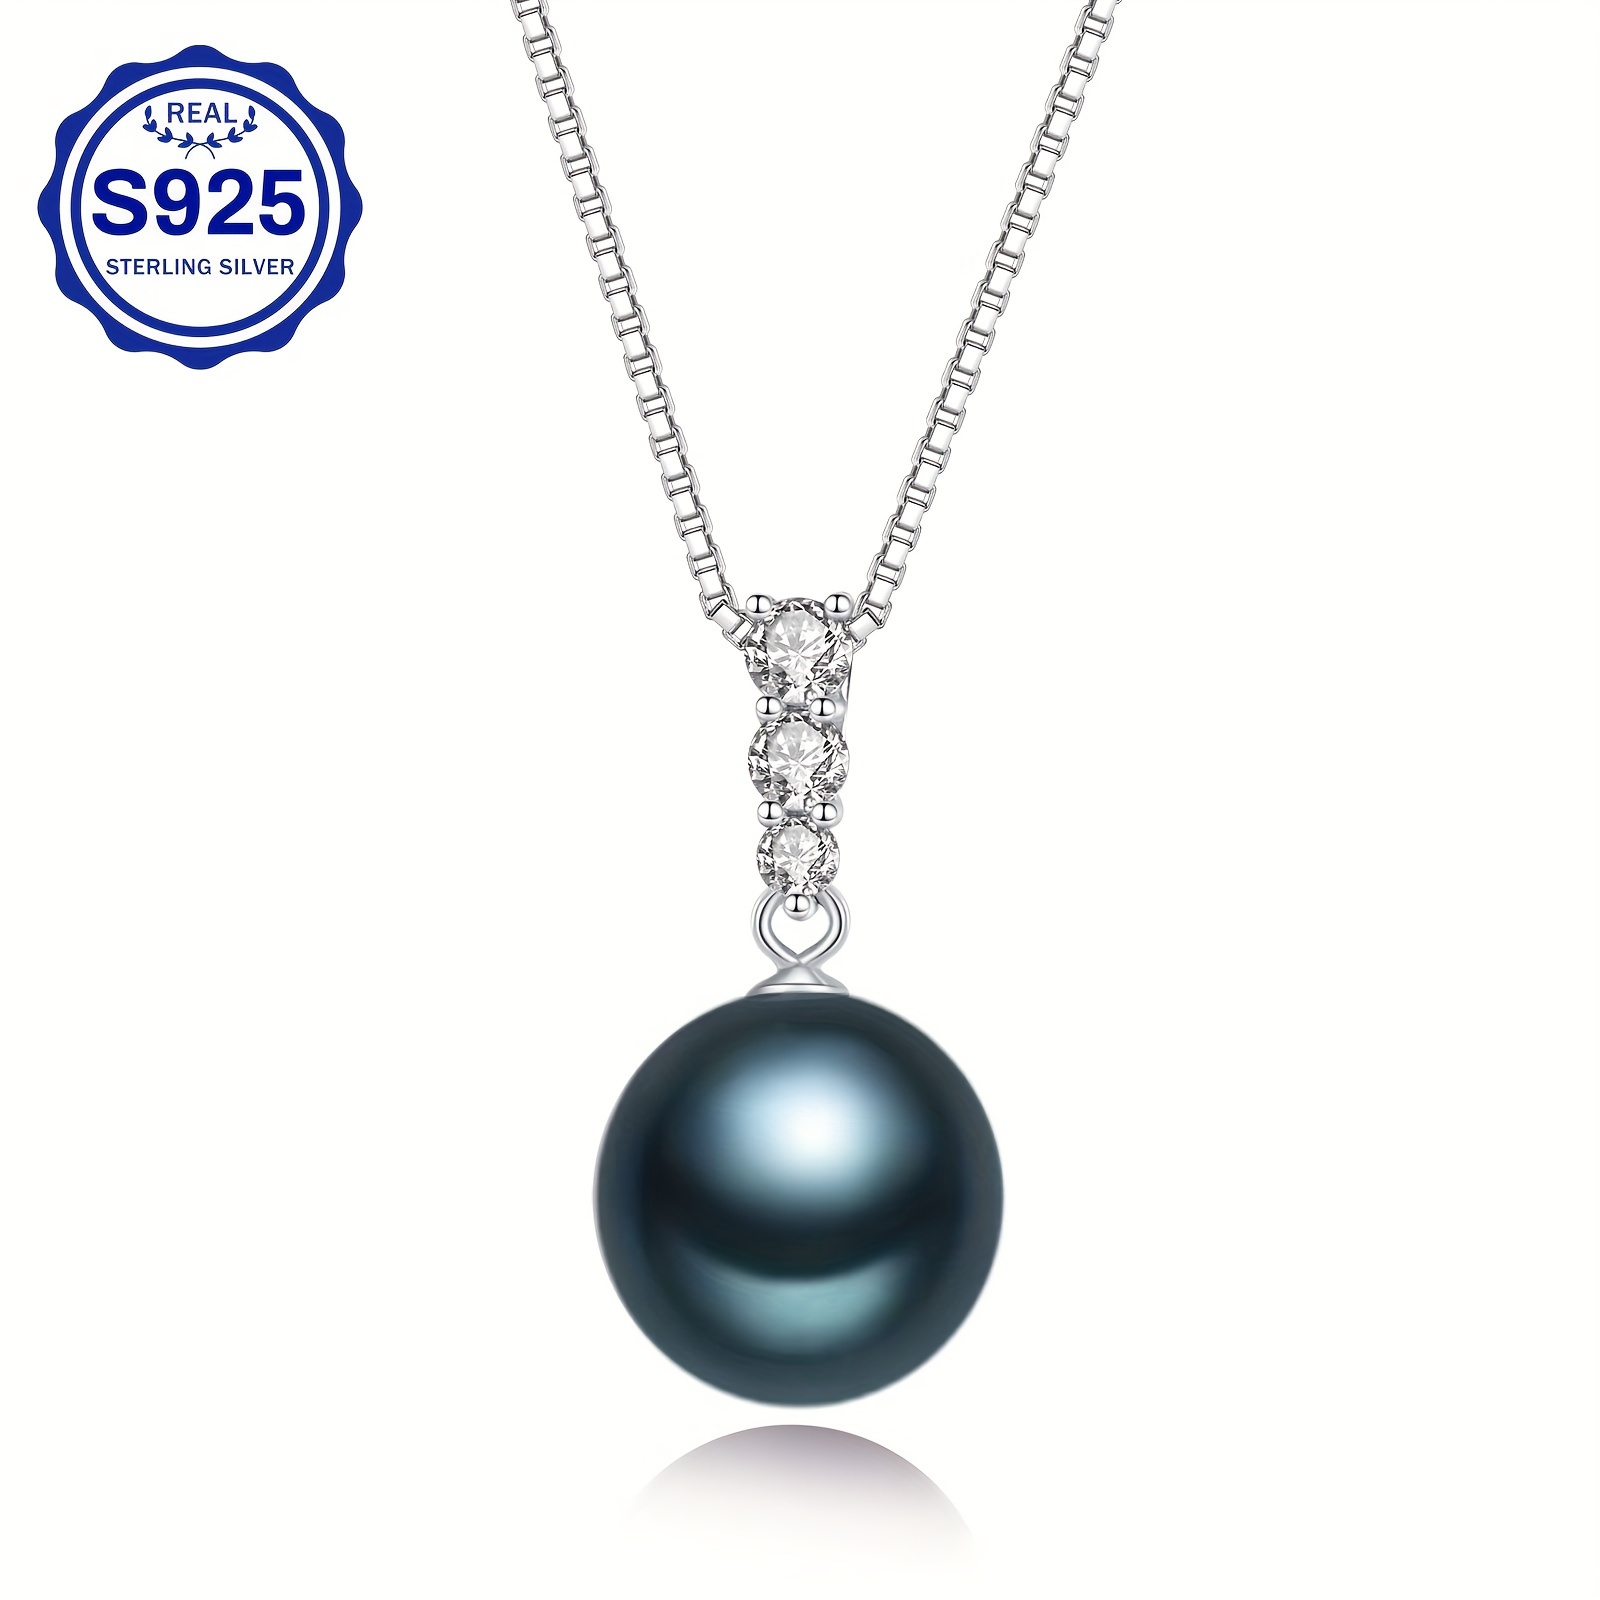 

Black Pearl Necklace, 11-13mm Genuine Tahitian Pearls Round, 925 For Women, Pendant Necklace With 18 Inch+2" Chain, Anniversary Jewelry Gifts For Wife Mom